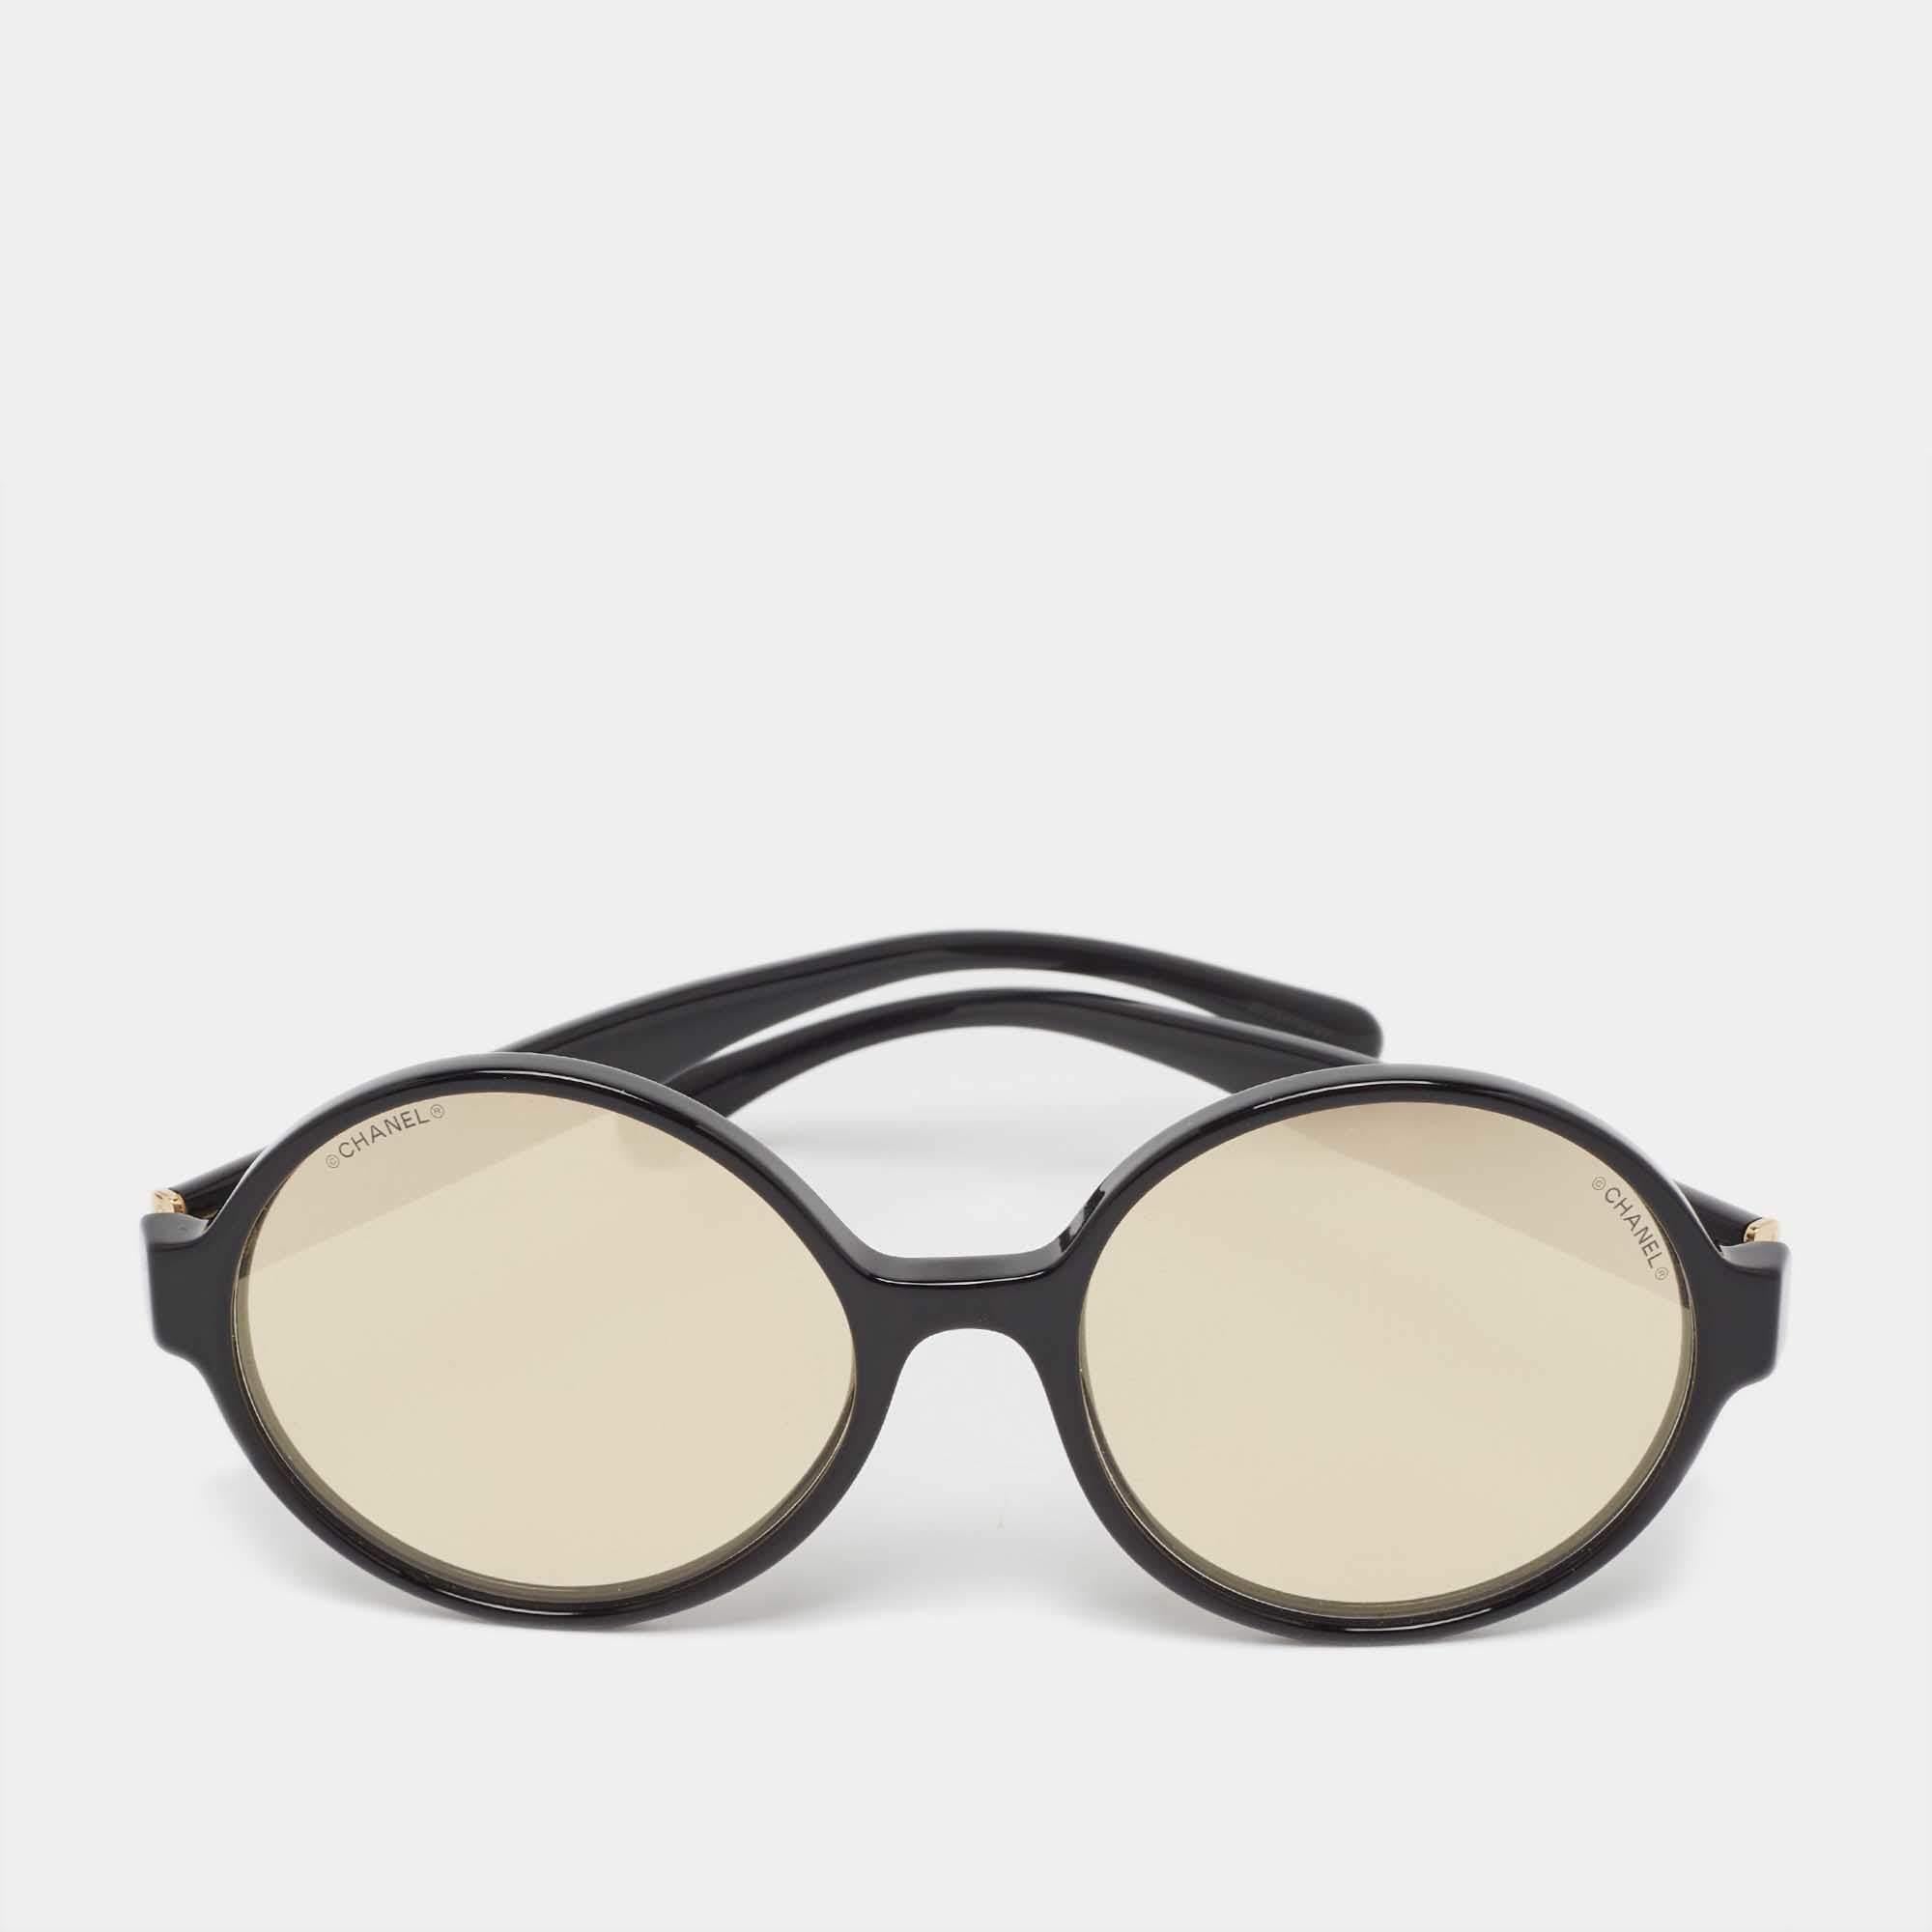 Embrace sunny days in full style with help from this pair of sunglasses by Chanel . Created with expertise, the luxe sunglasses feature a well-designed frame and high-grade lenses that are equipped to protect your eyes.

Includes
Original Box, Info